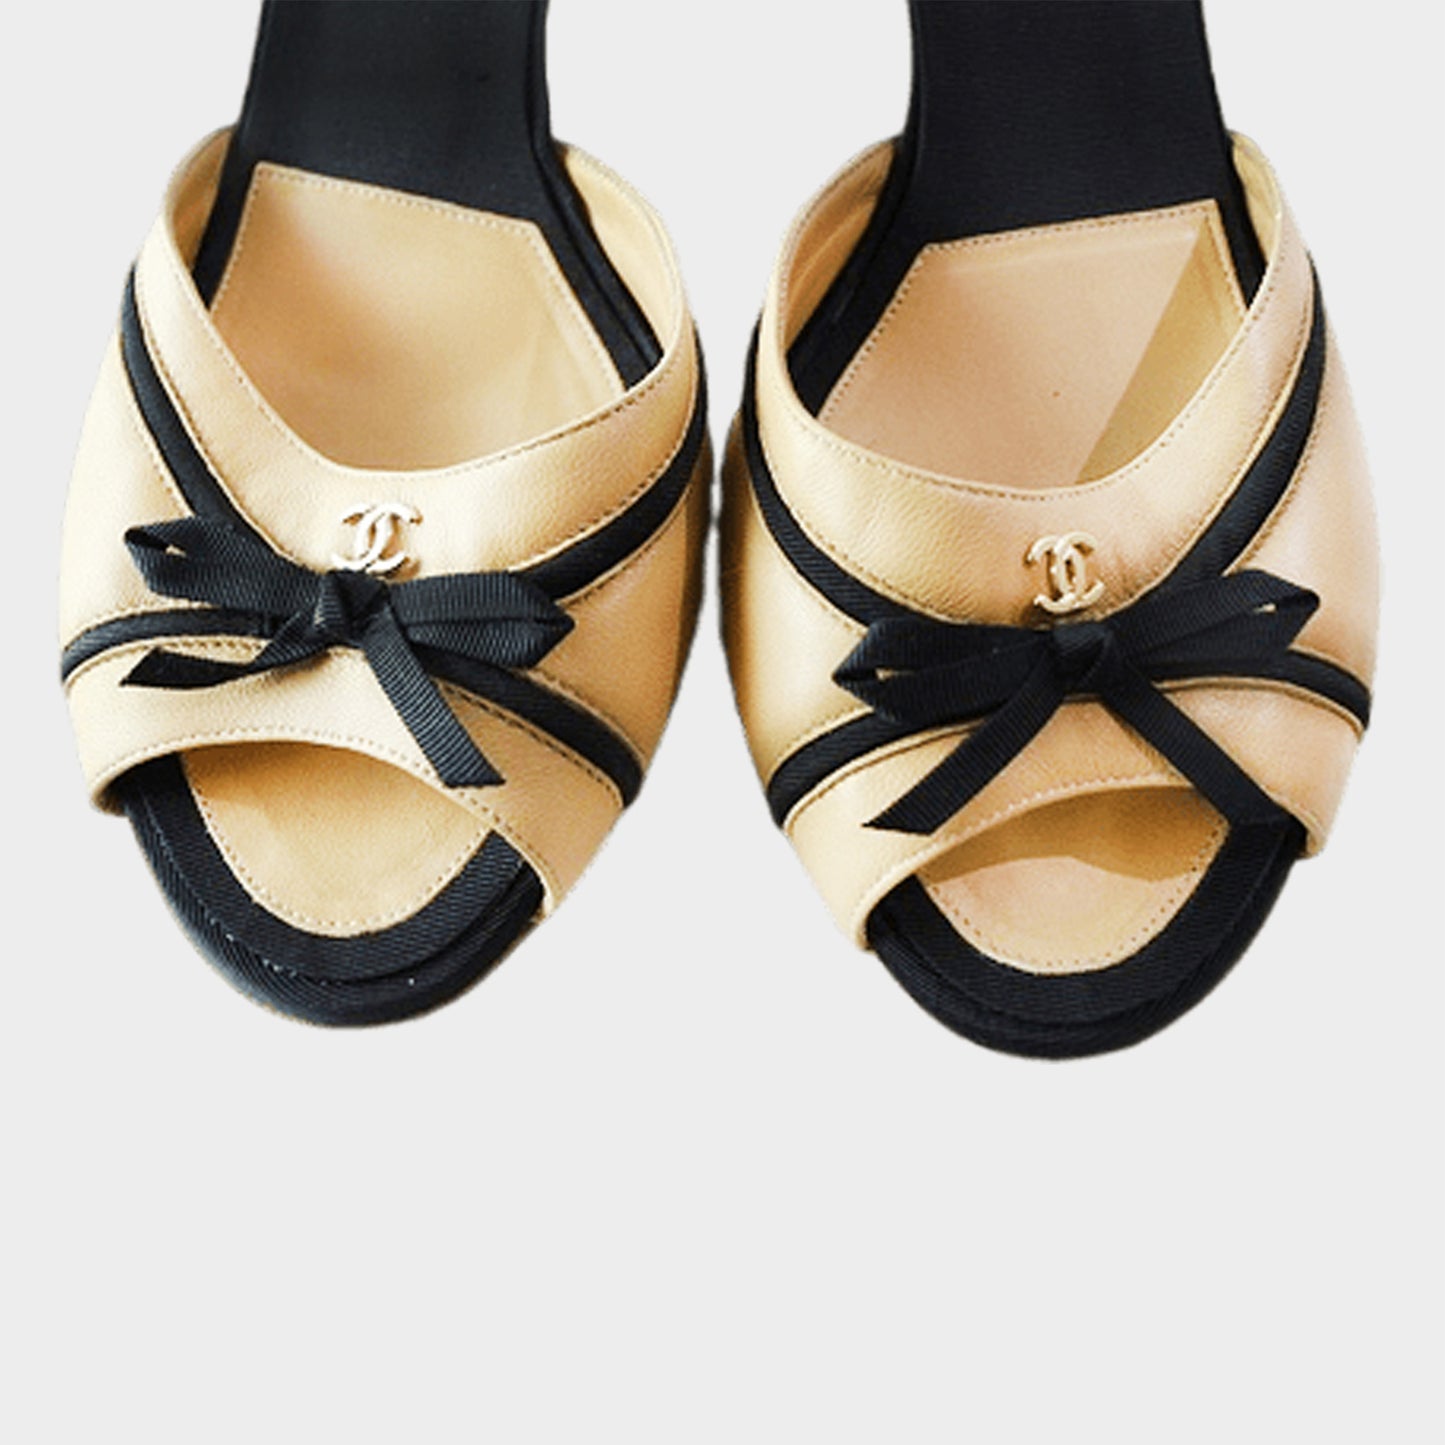 CHANEL 2000S TAN AND BLACK BOW HEELS